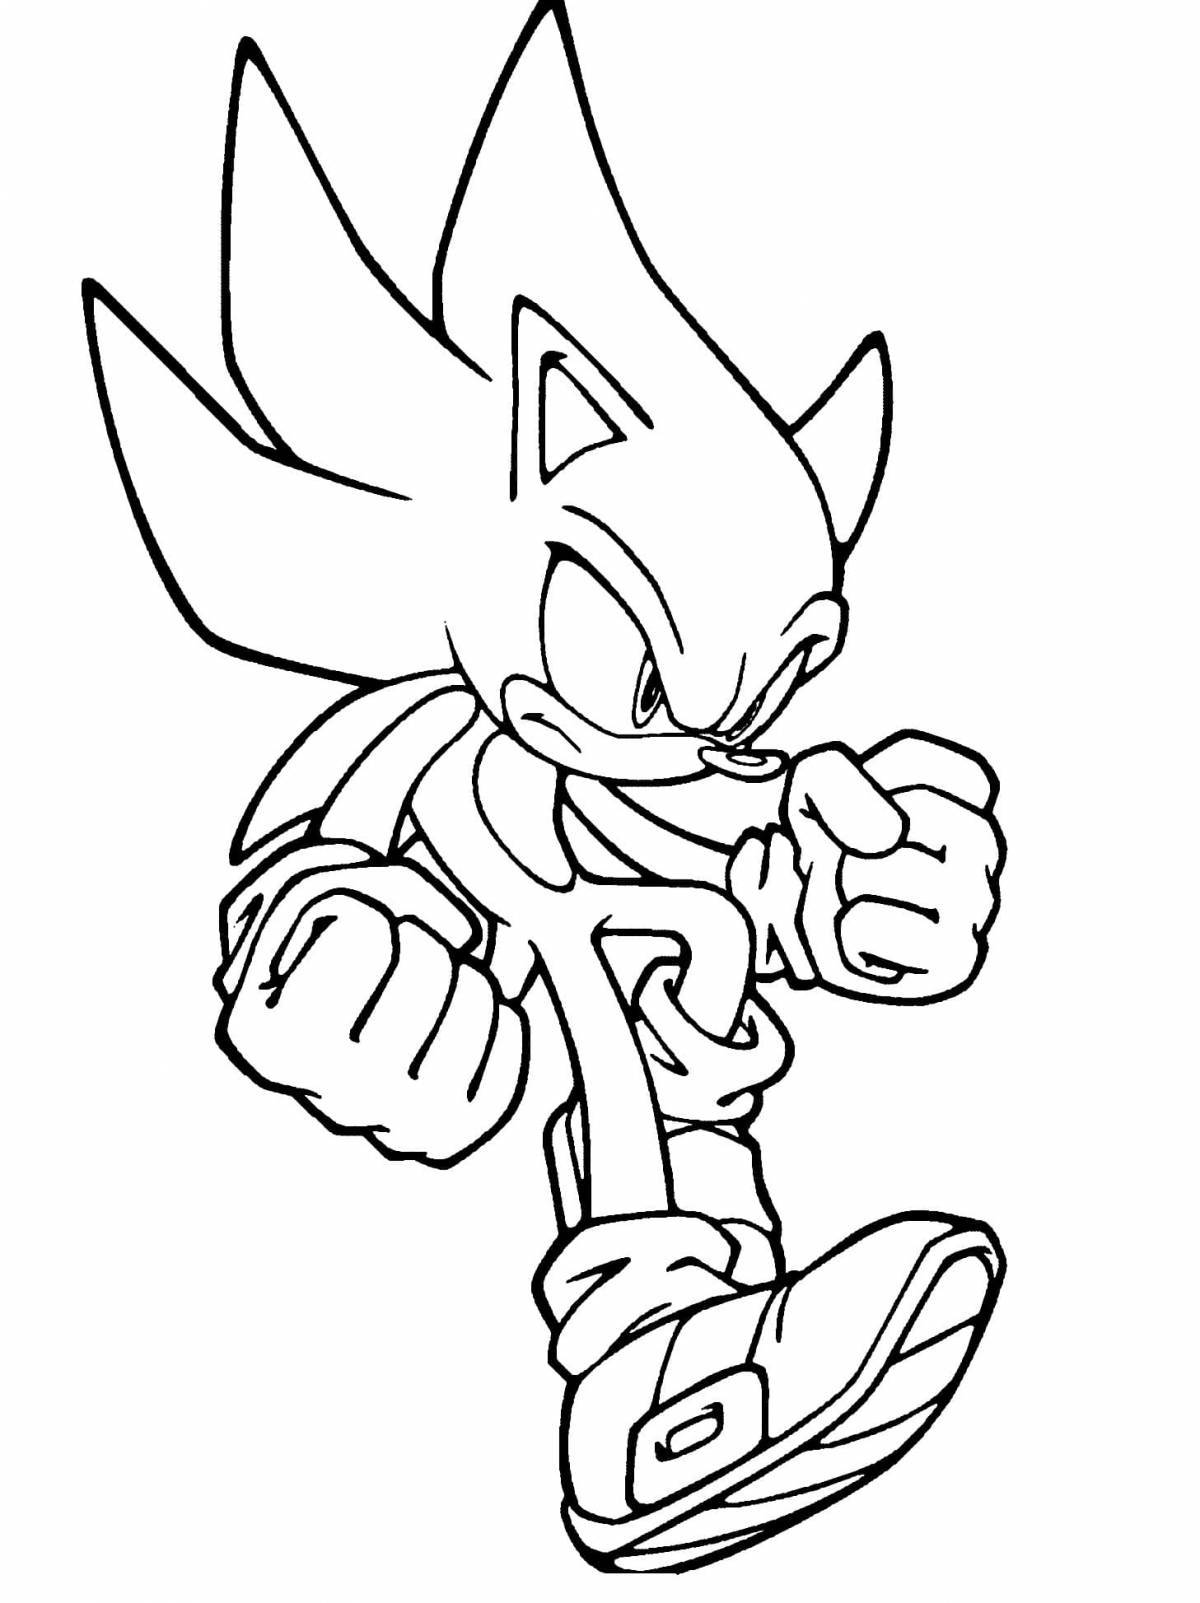 Playful sonic coloring page